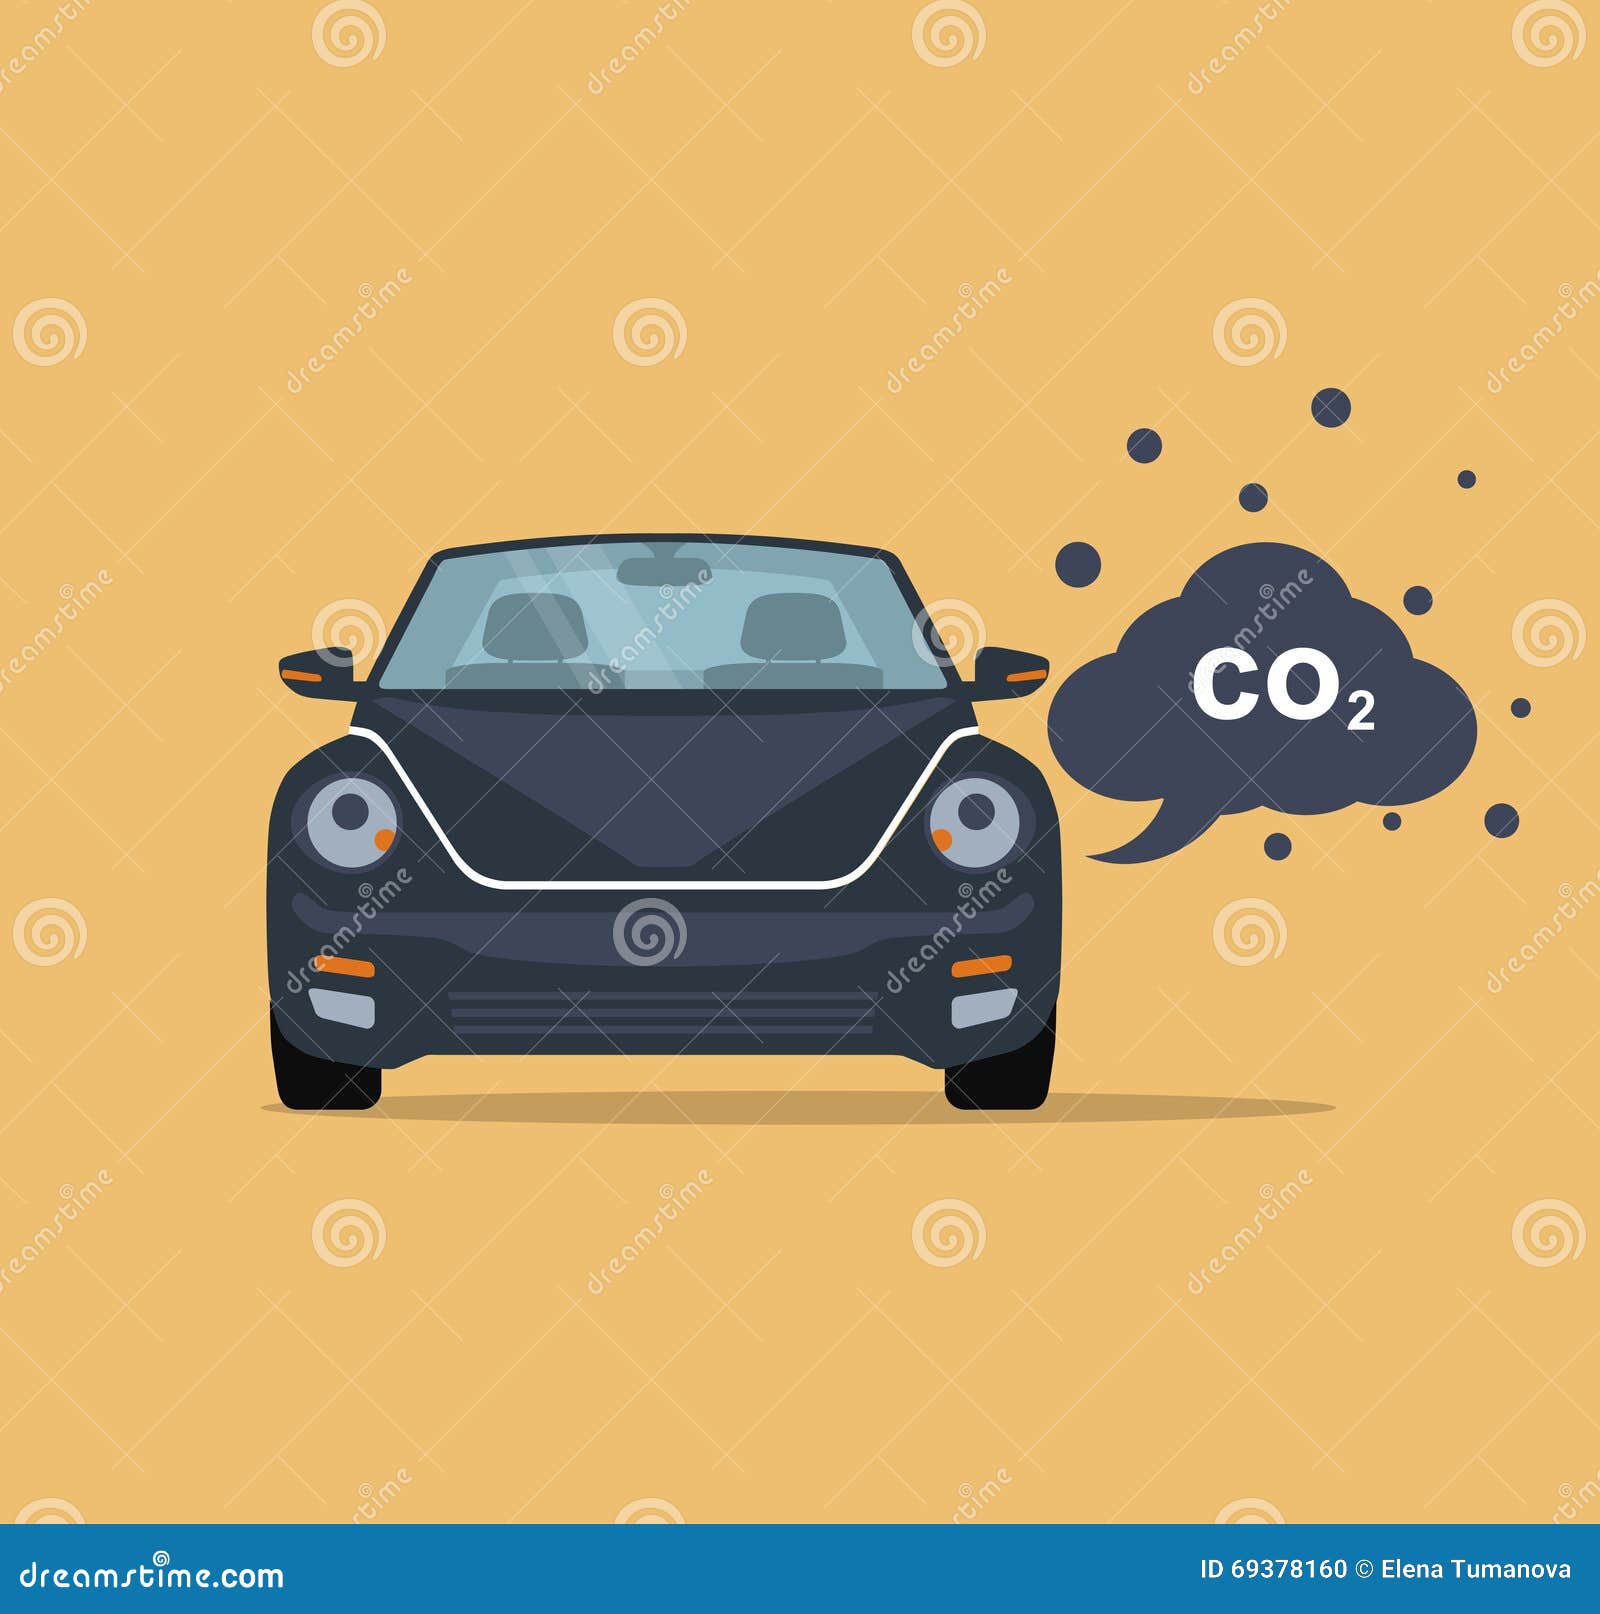 Car Emits Carbon Dioxide. Flat Style Stock Vector - Illustration of ...